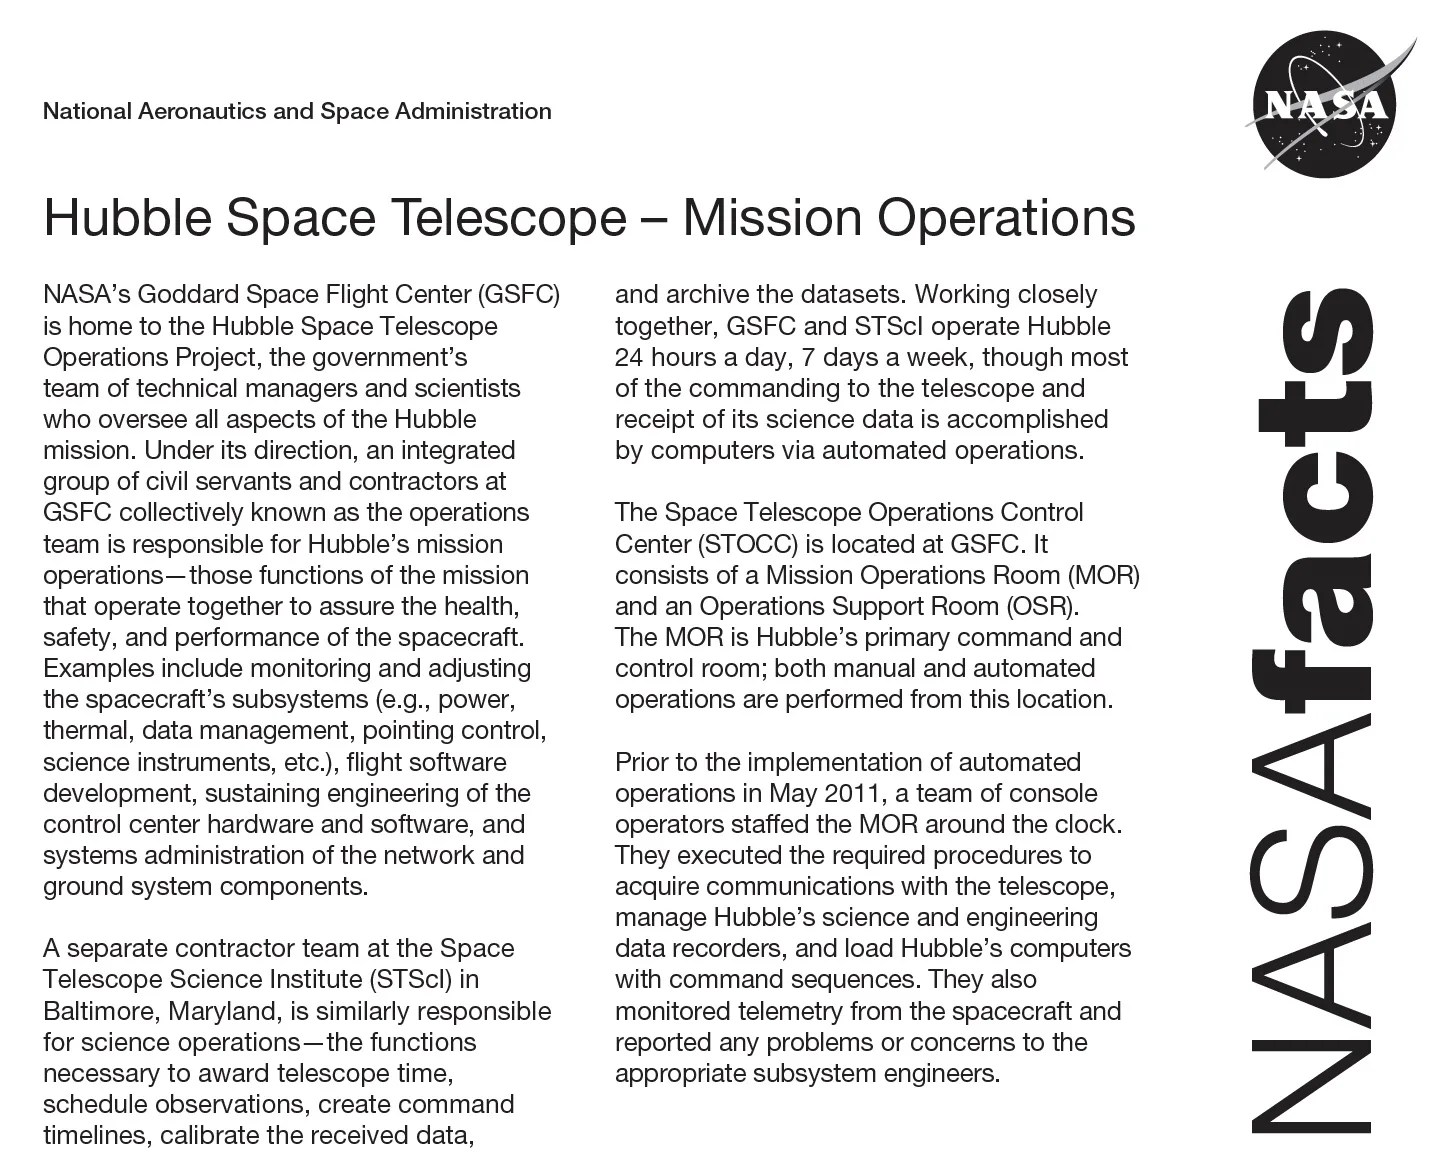 Screenshot of .pdf of "NASAFACTS" document, titled "Hubble Space Telescope - Mission Operations" The document has lots of text going over the mission, this is a thumbnail, when clicking it the .pdf will open.